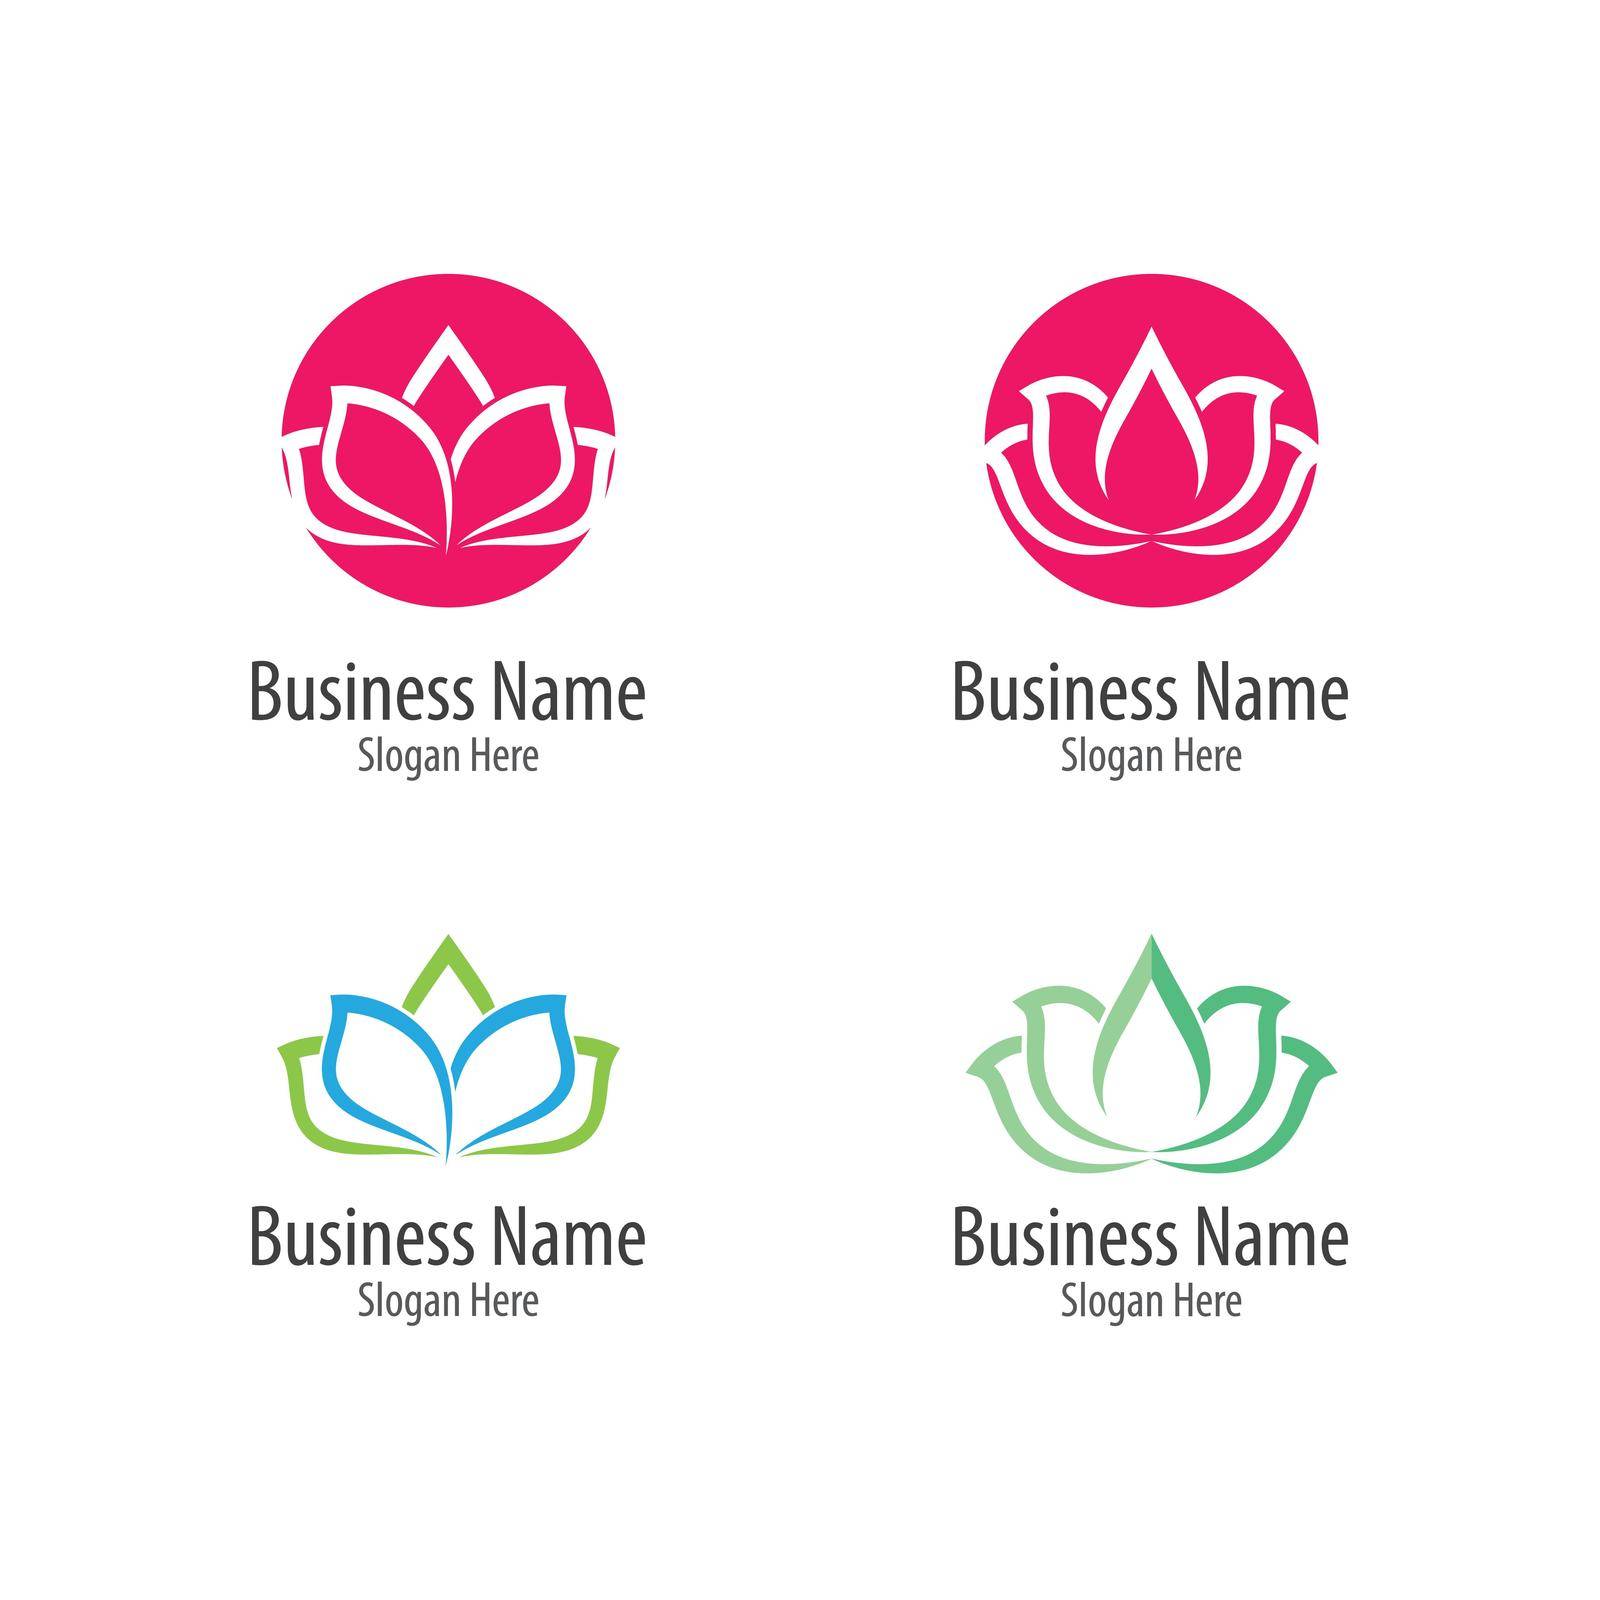 Beauty flowers logo template vector icon